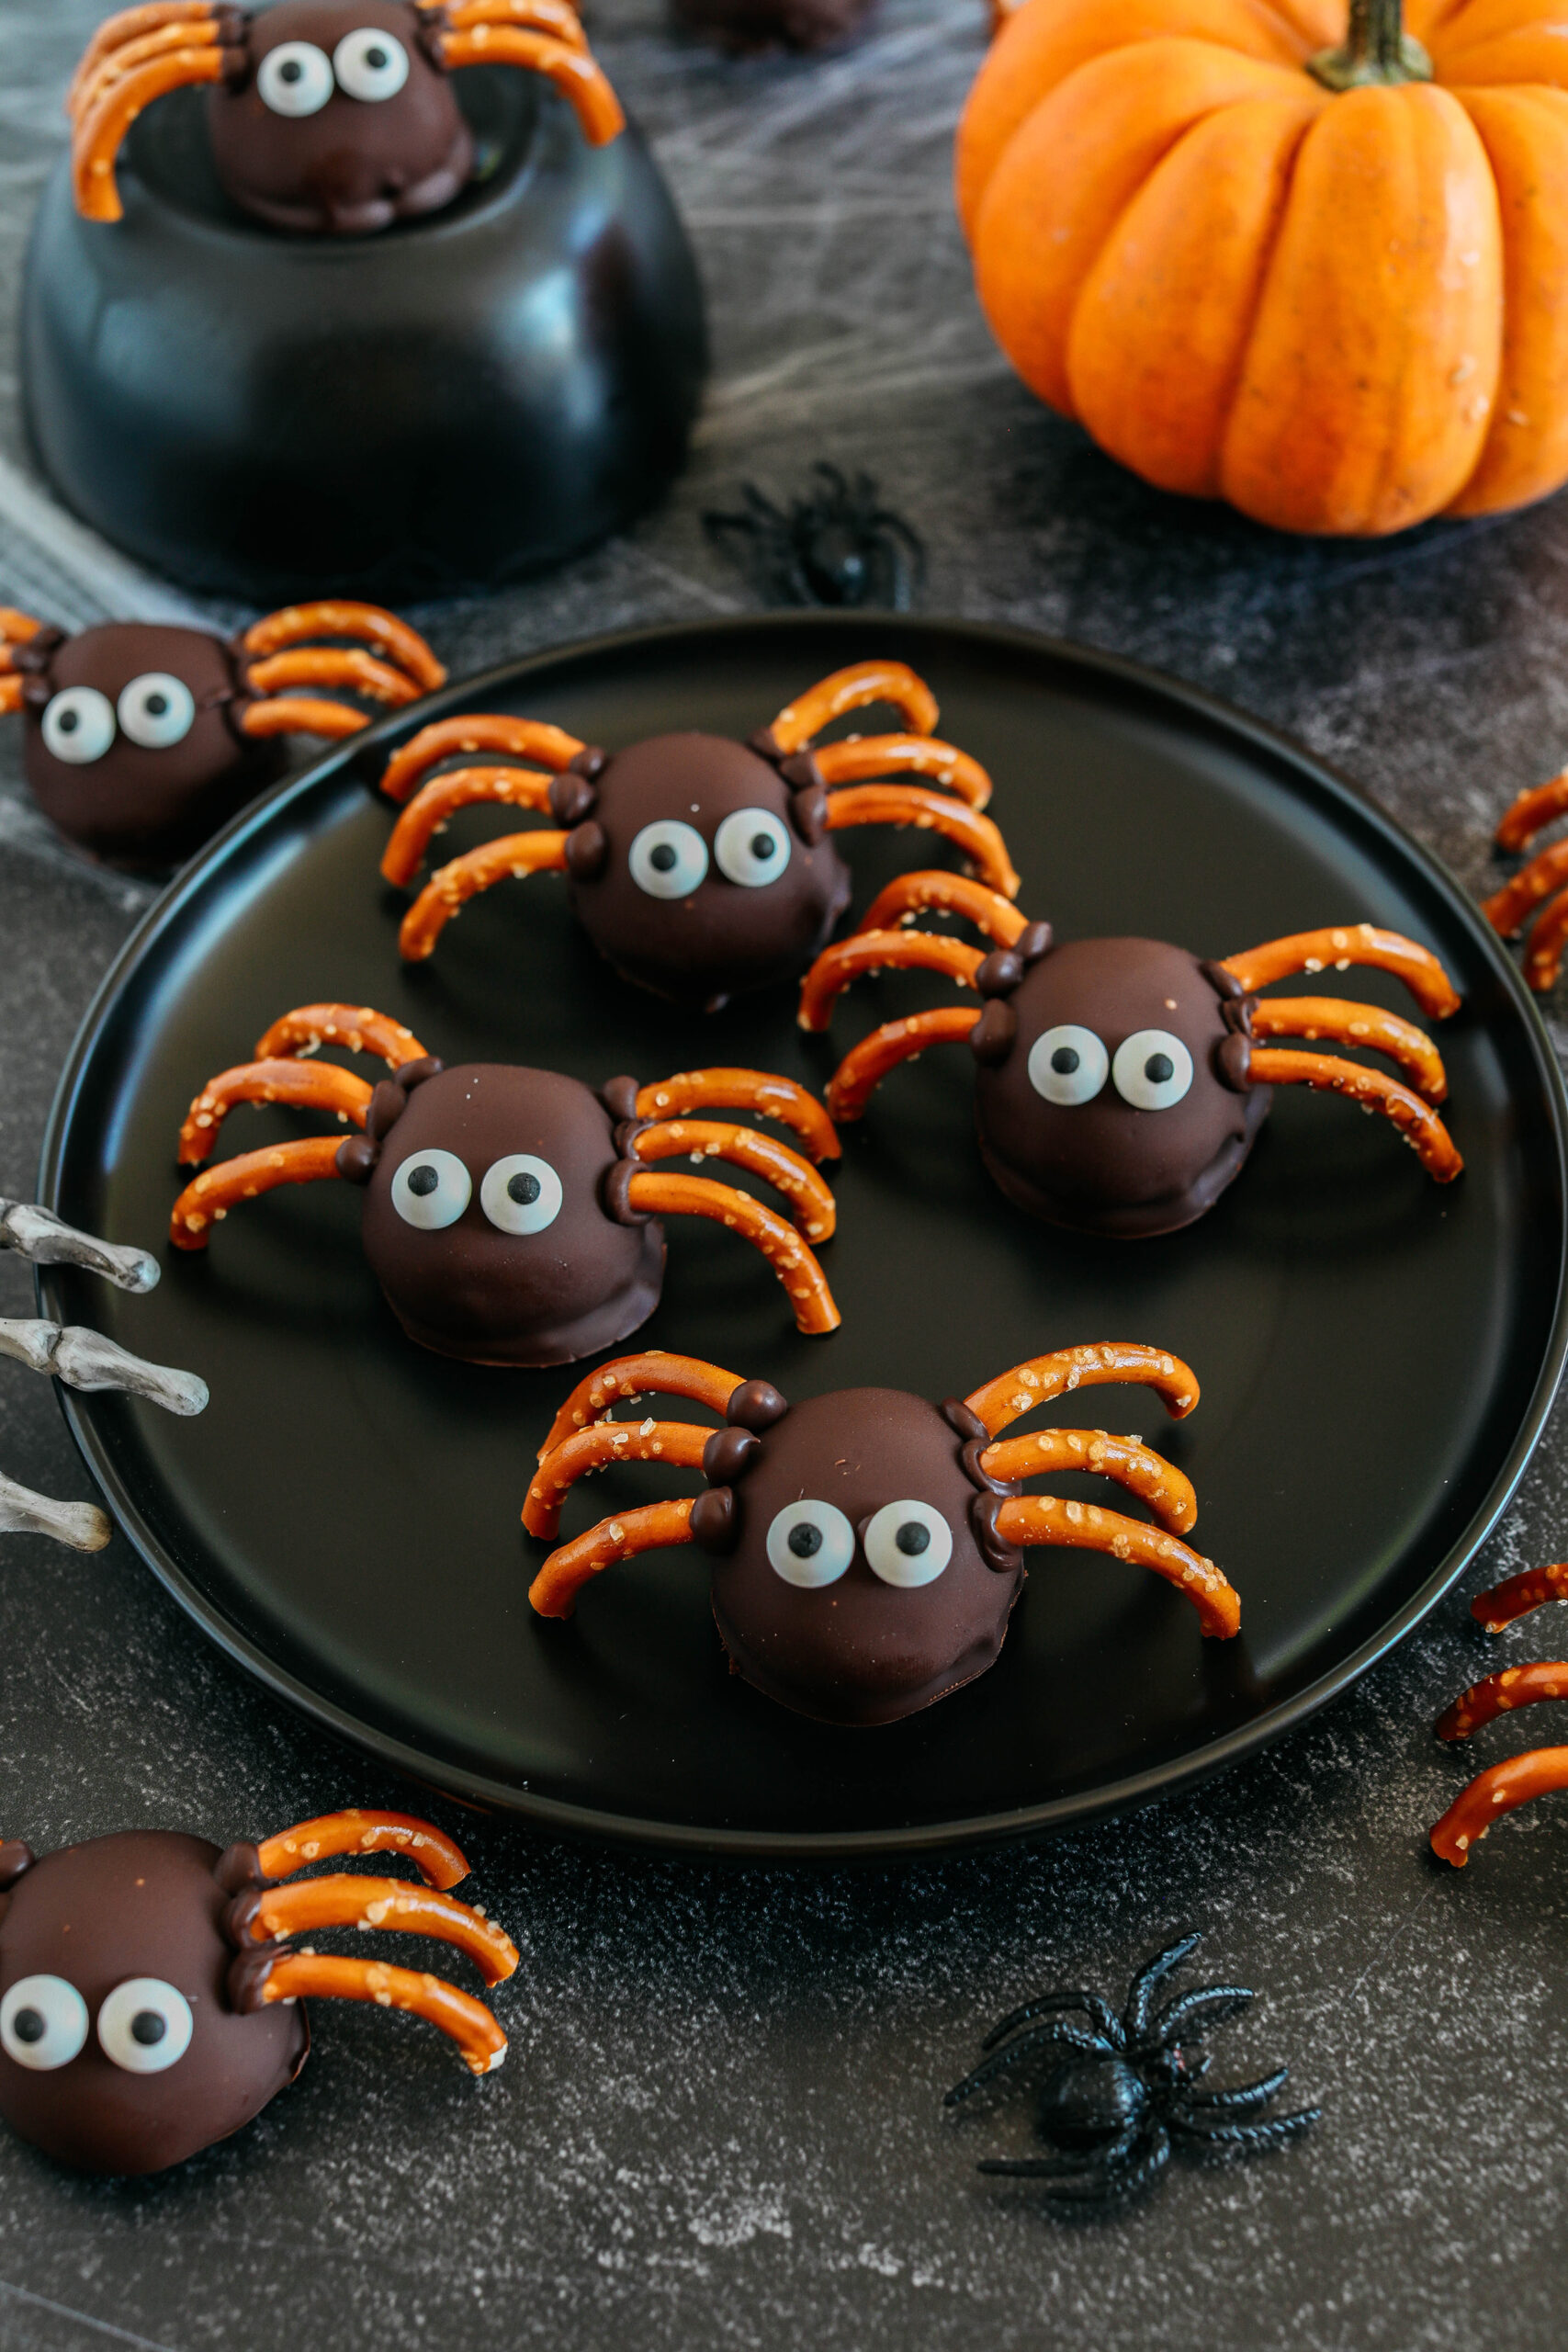 Get festive this Halloween with these tasty Chocolate Peanut Butter Spider Balls made with just 5 simple ingredients and zero baking required!  The perfect sweet and salty treats that are easy to make and your kids will love!